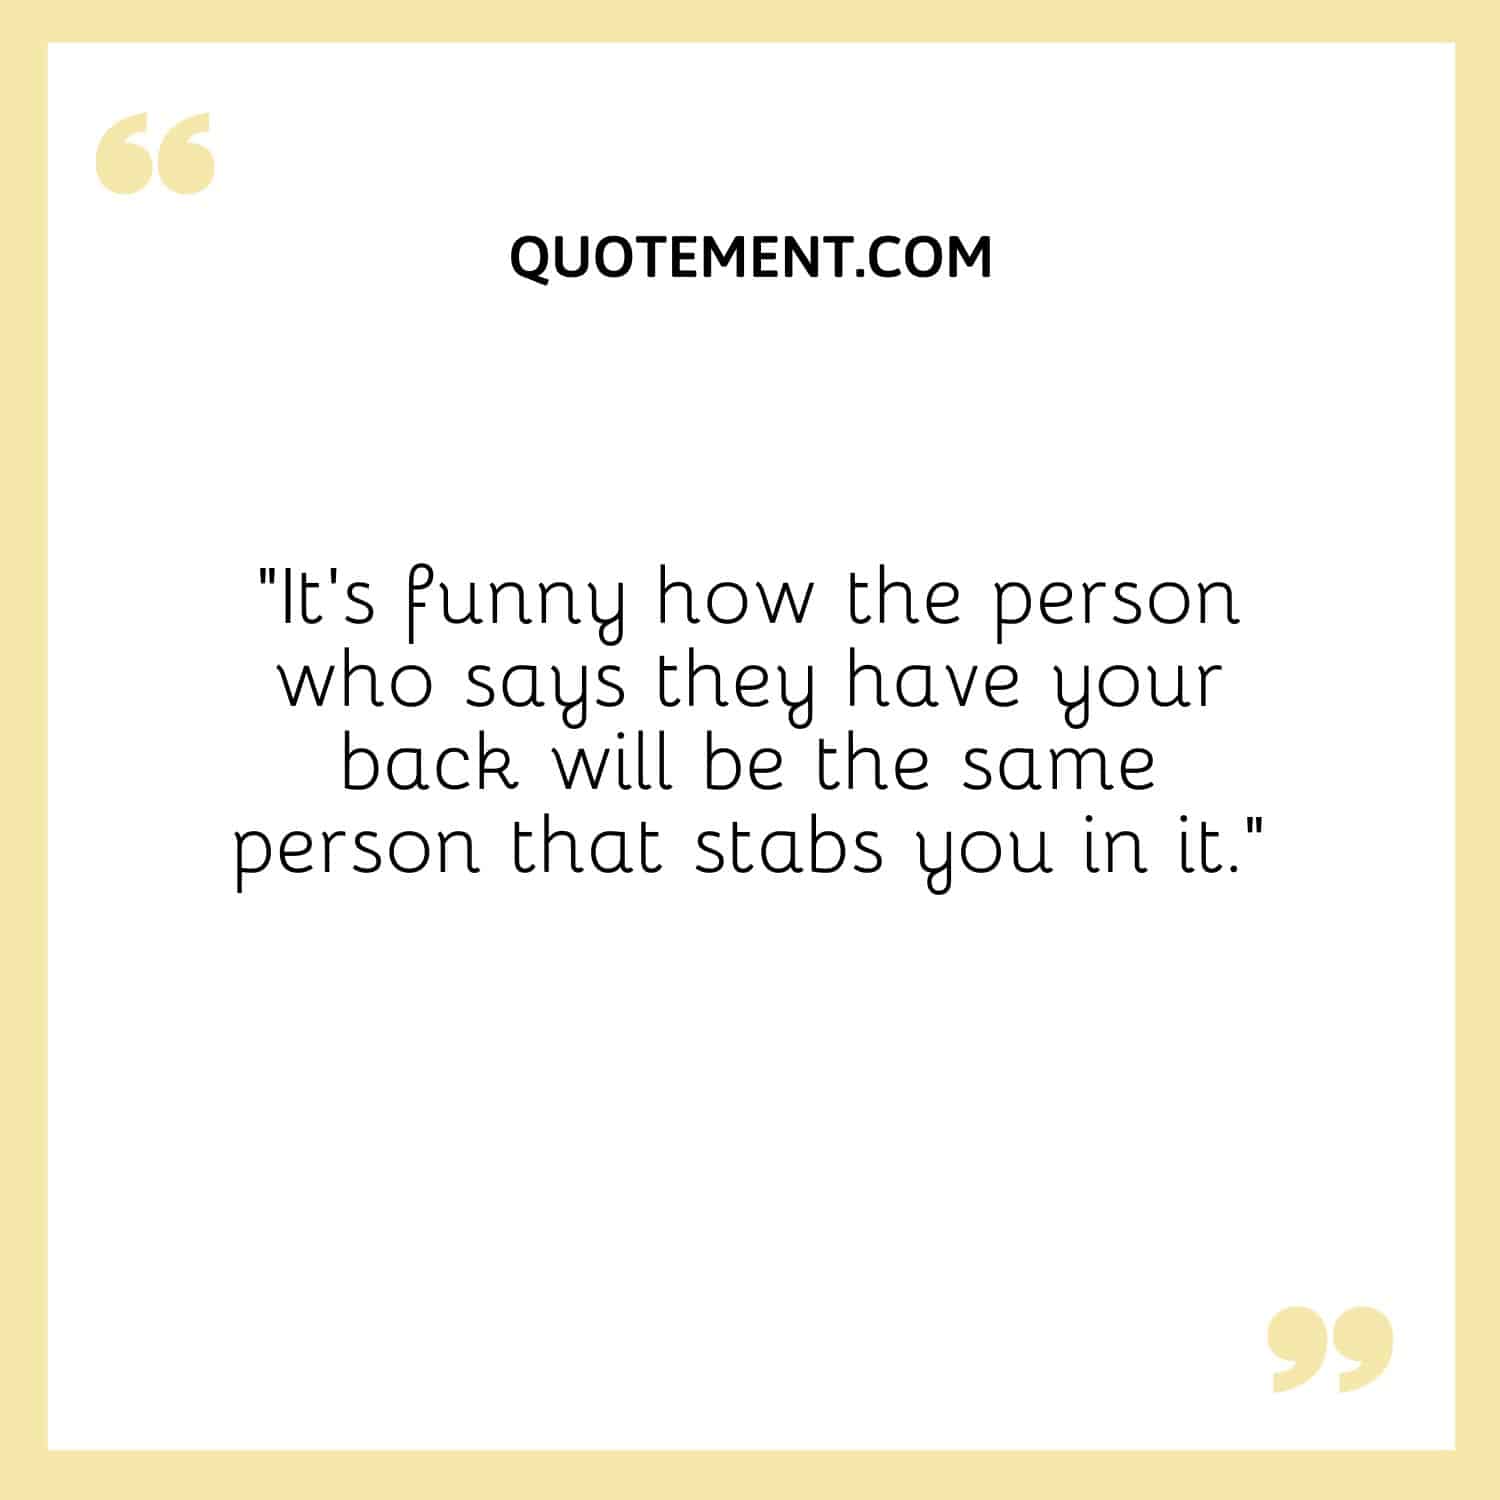 “It’s funny how the person who says they have your back will be the same person that stabs you in it.”